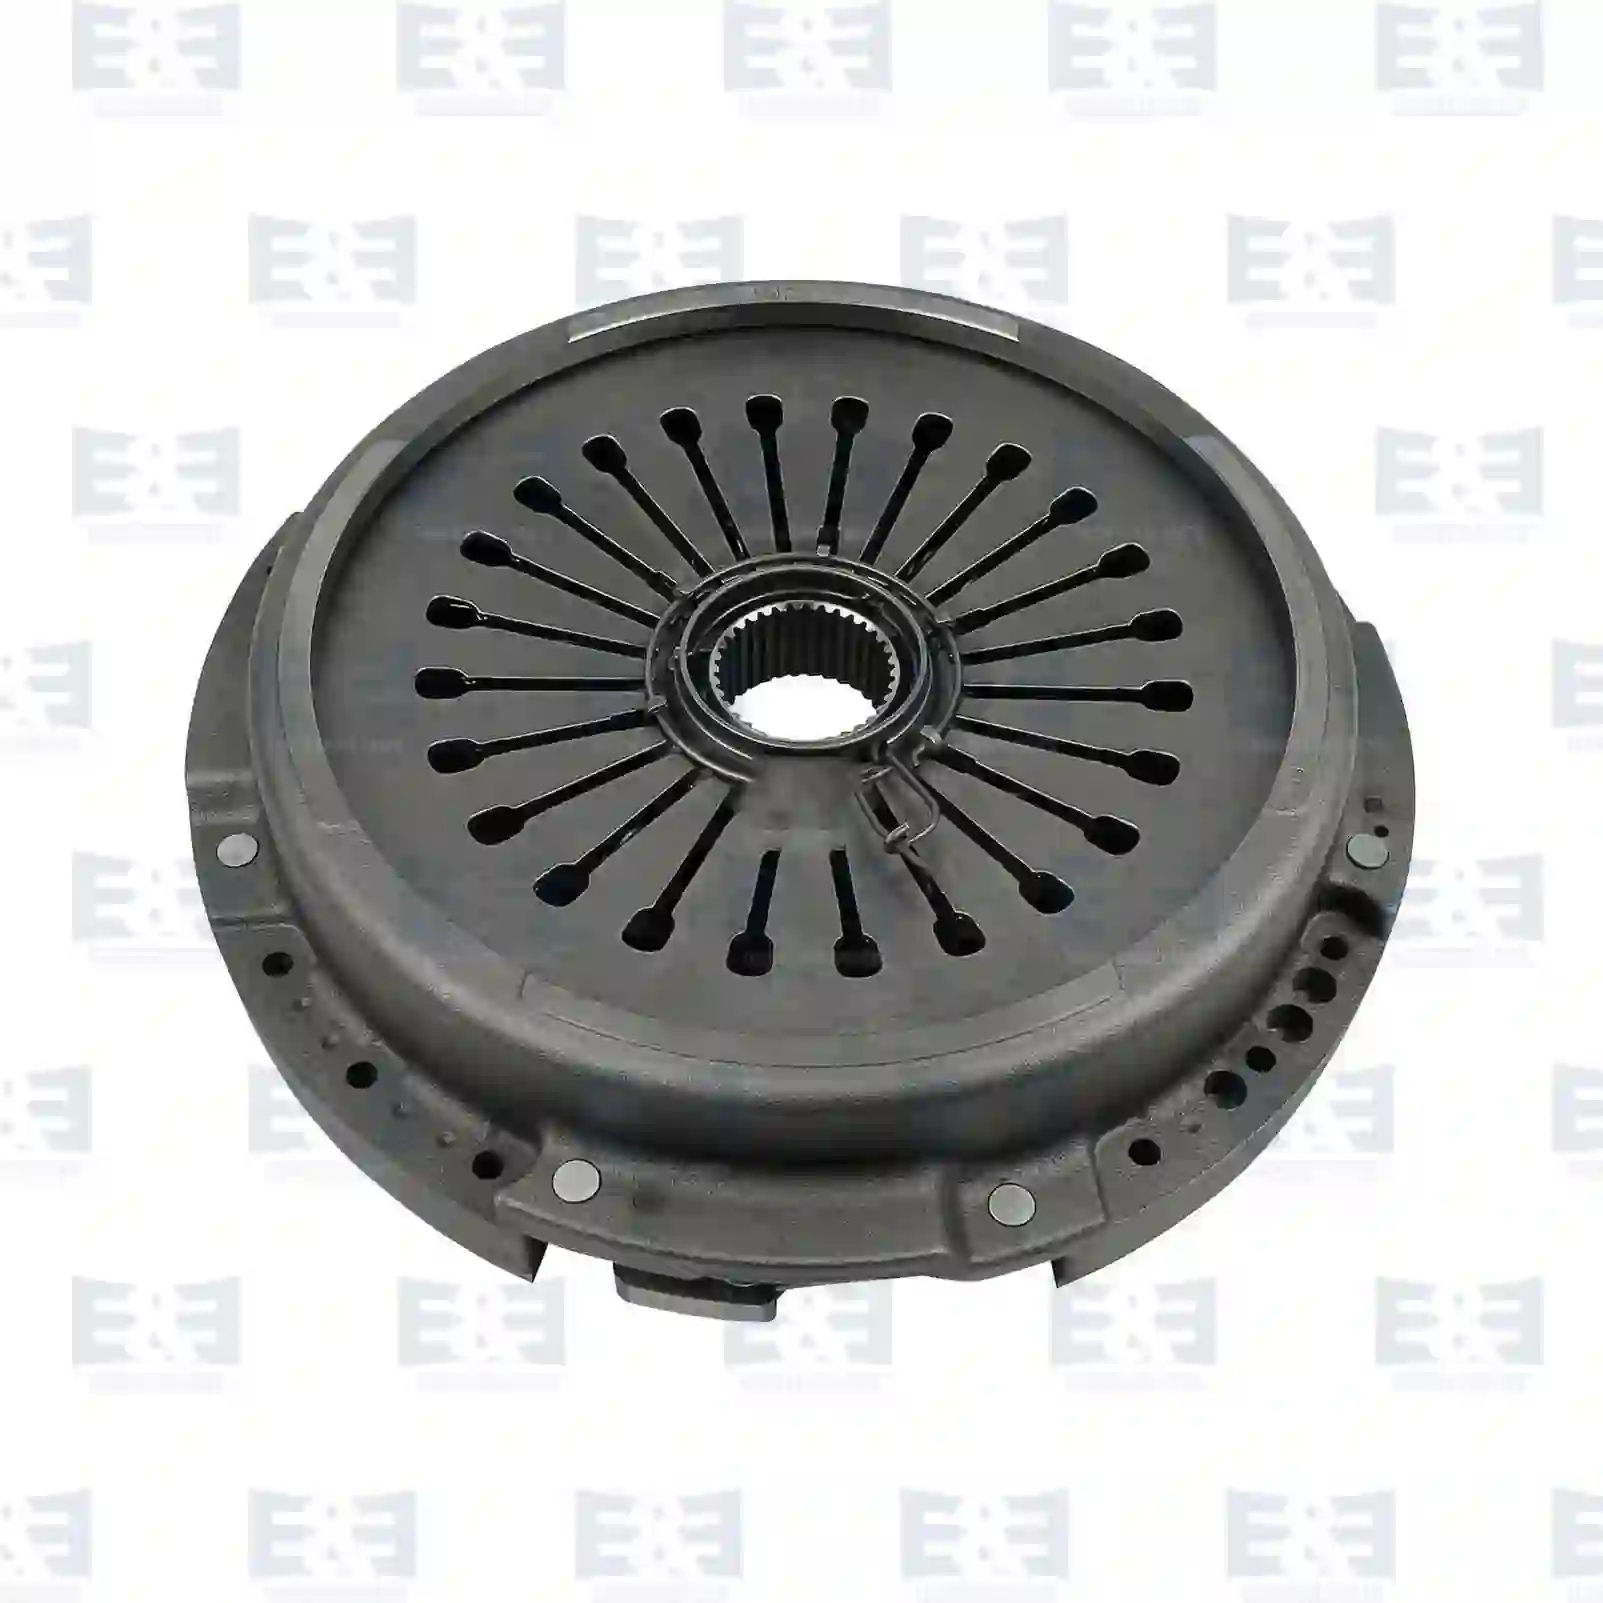  Clutch Kit (Cover & Disc) Clutch cover, EE No 2E2289210 ,  oem no:52RS020389, 1735708, 42022206, 81303050197, 81303050226, 81303059197, 81303059226, 81303050197, 81303050226 E&E Truck Spare Parts | Truck Spare Parts, Auotomotive Spare Parts